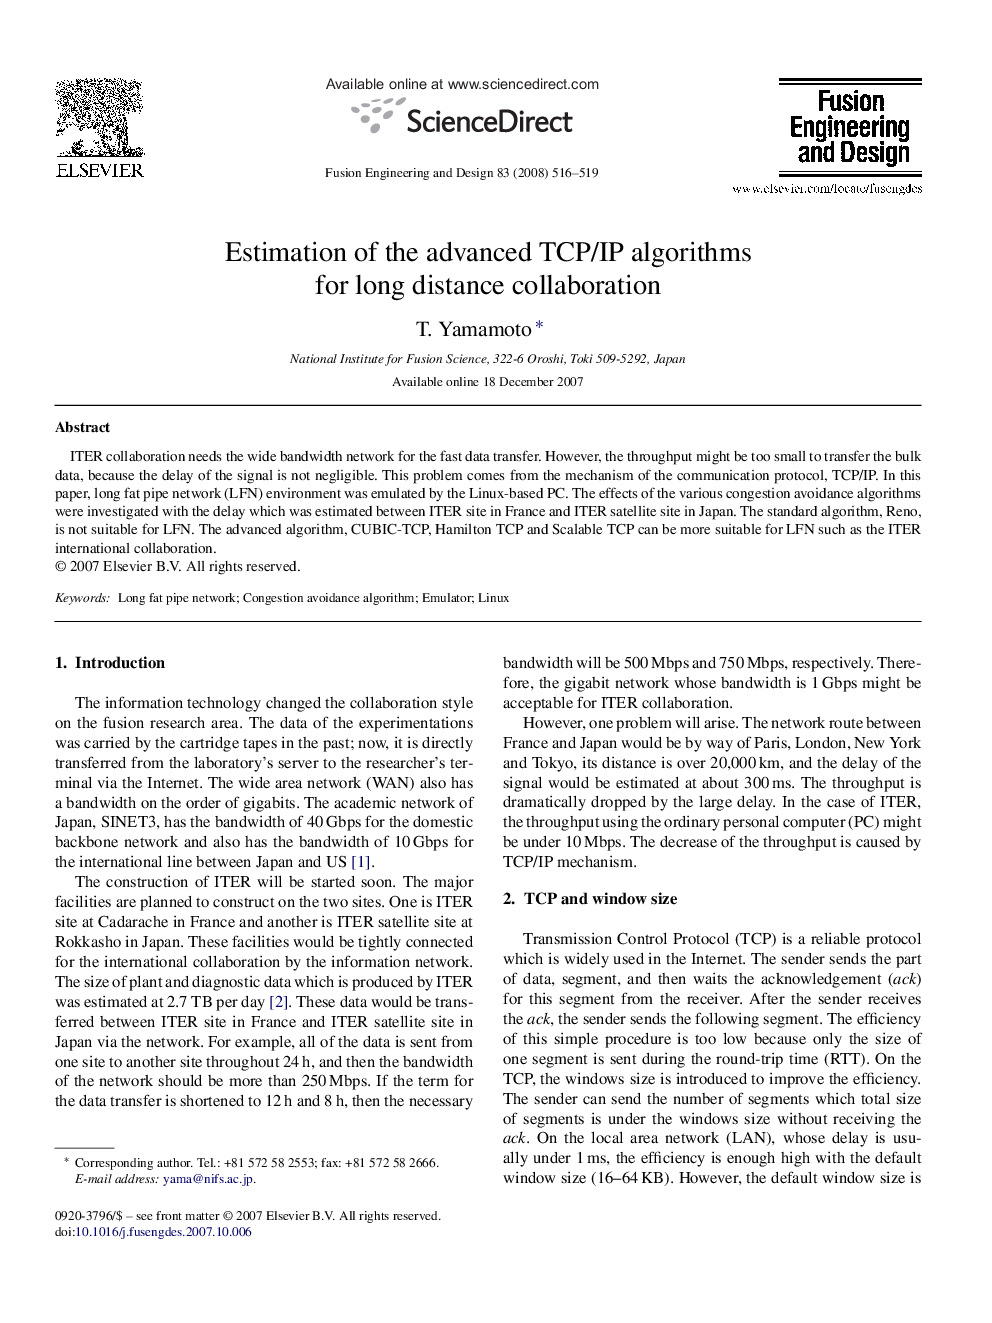 Estimation of the advanced TCP/IP algorithms for long distance collaboration